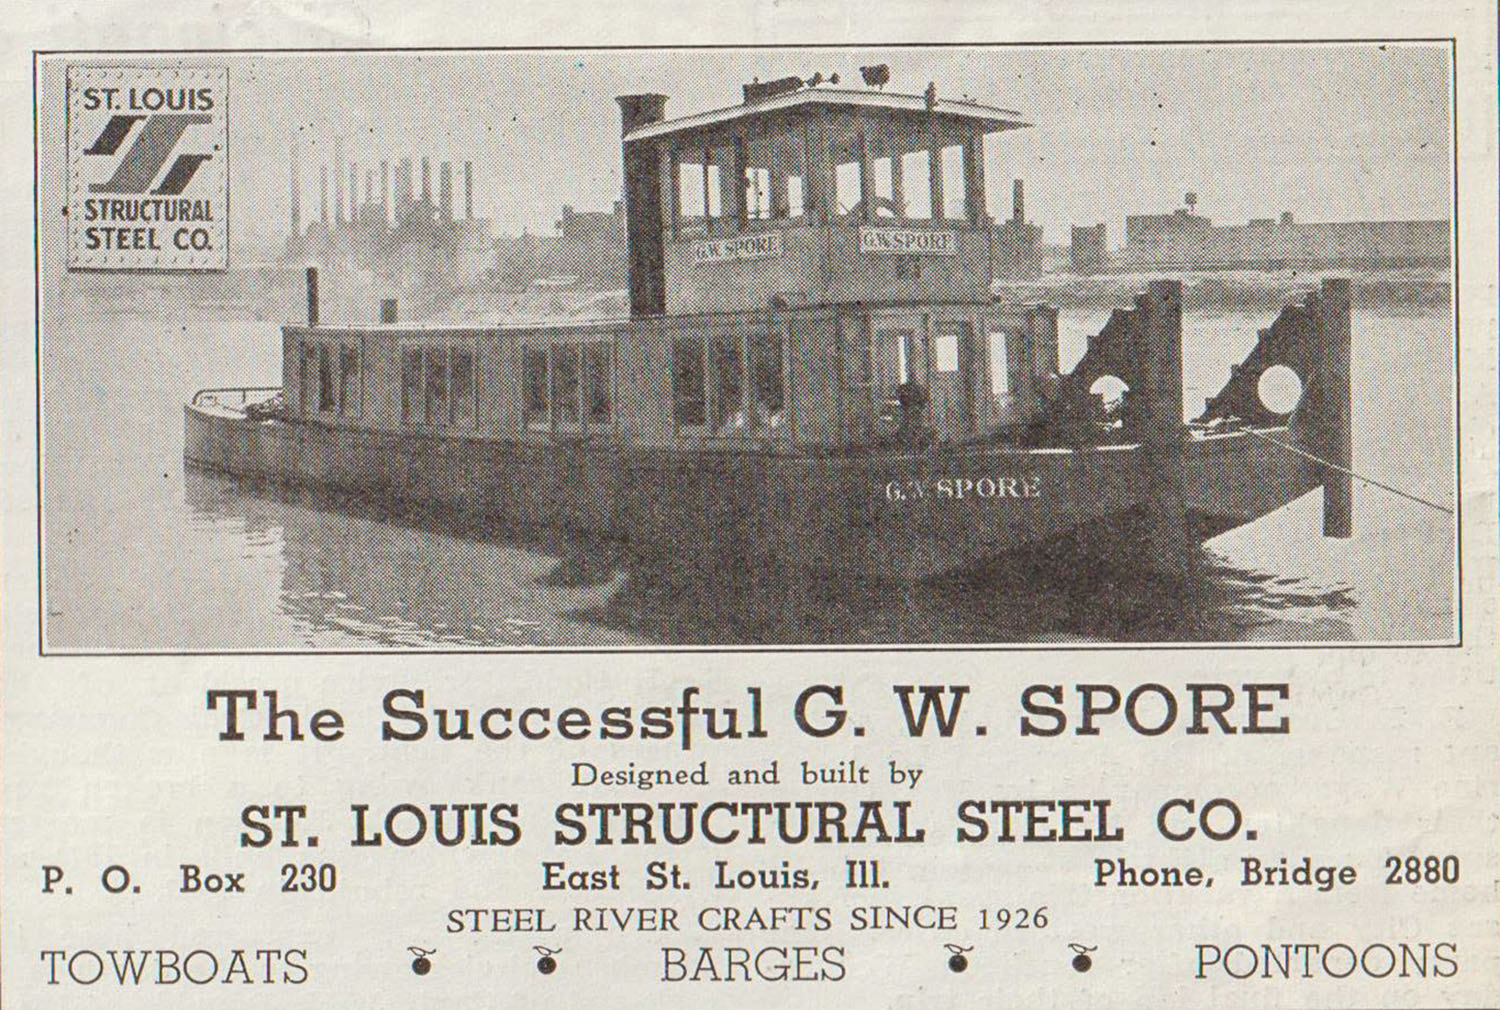 The G.W. Spore Helped Give Birth To St. Louis Ship